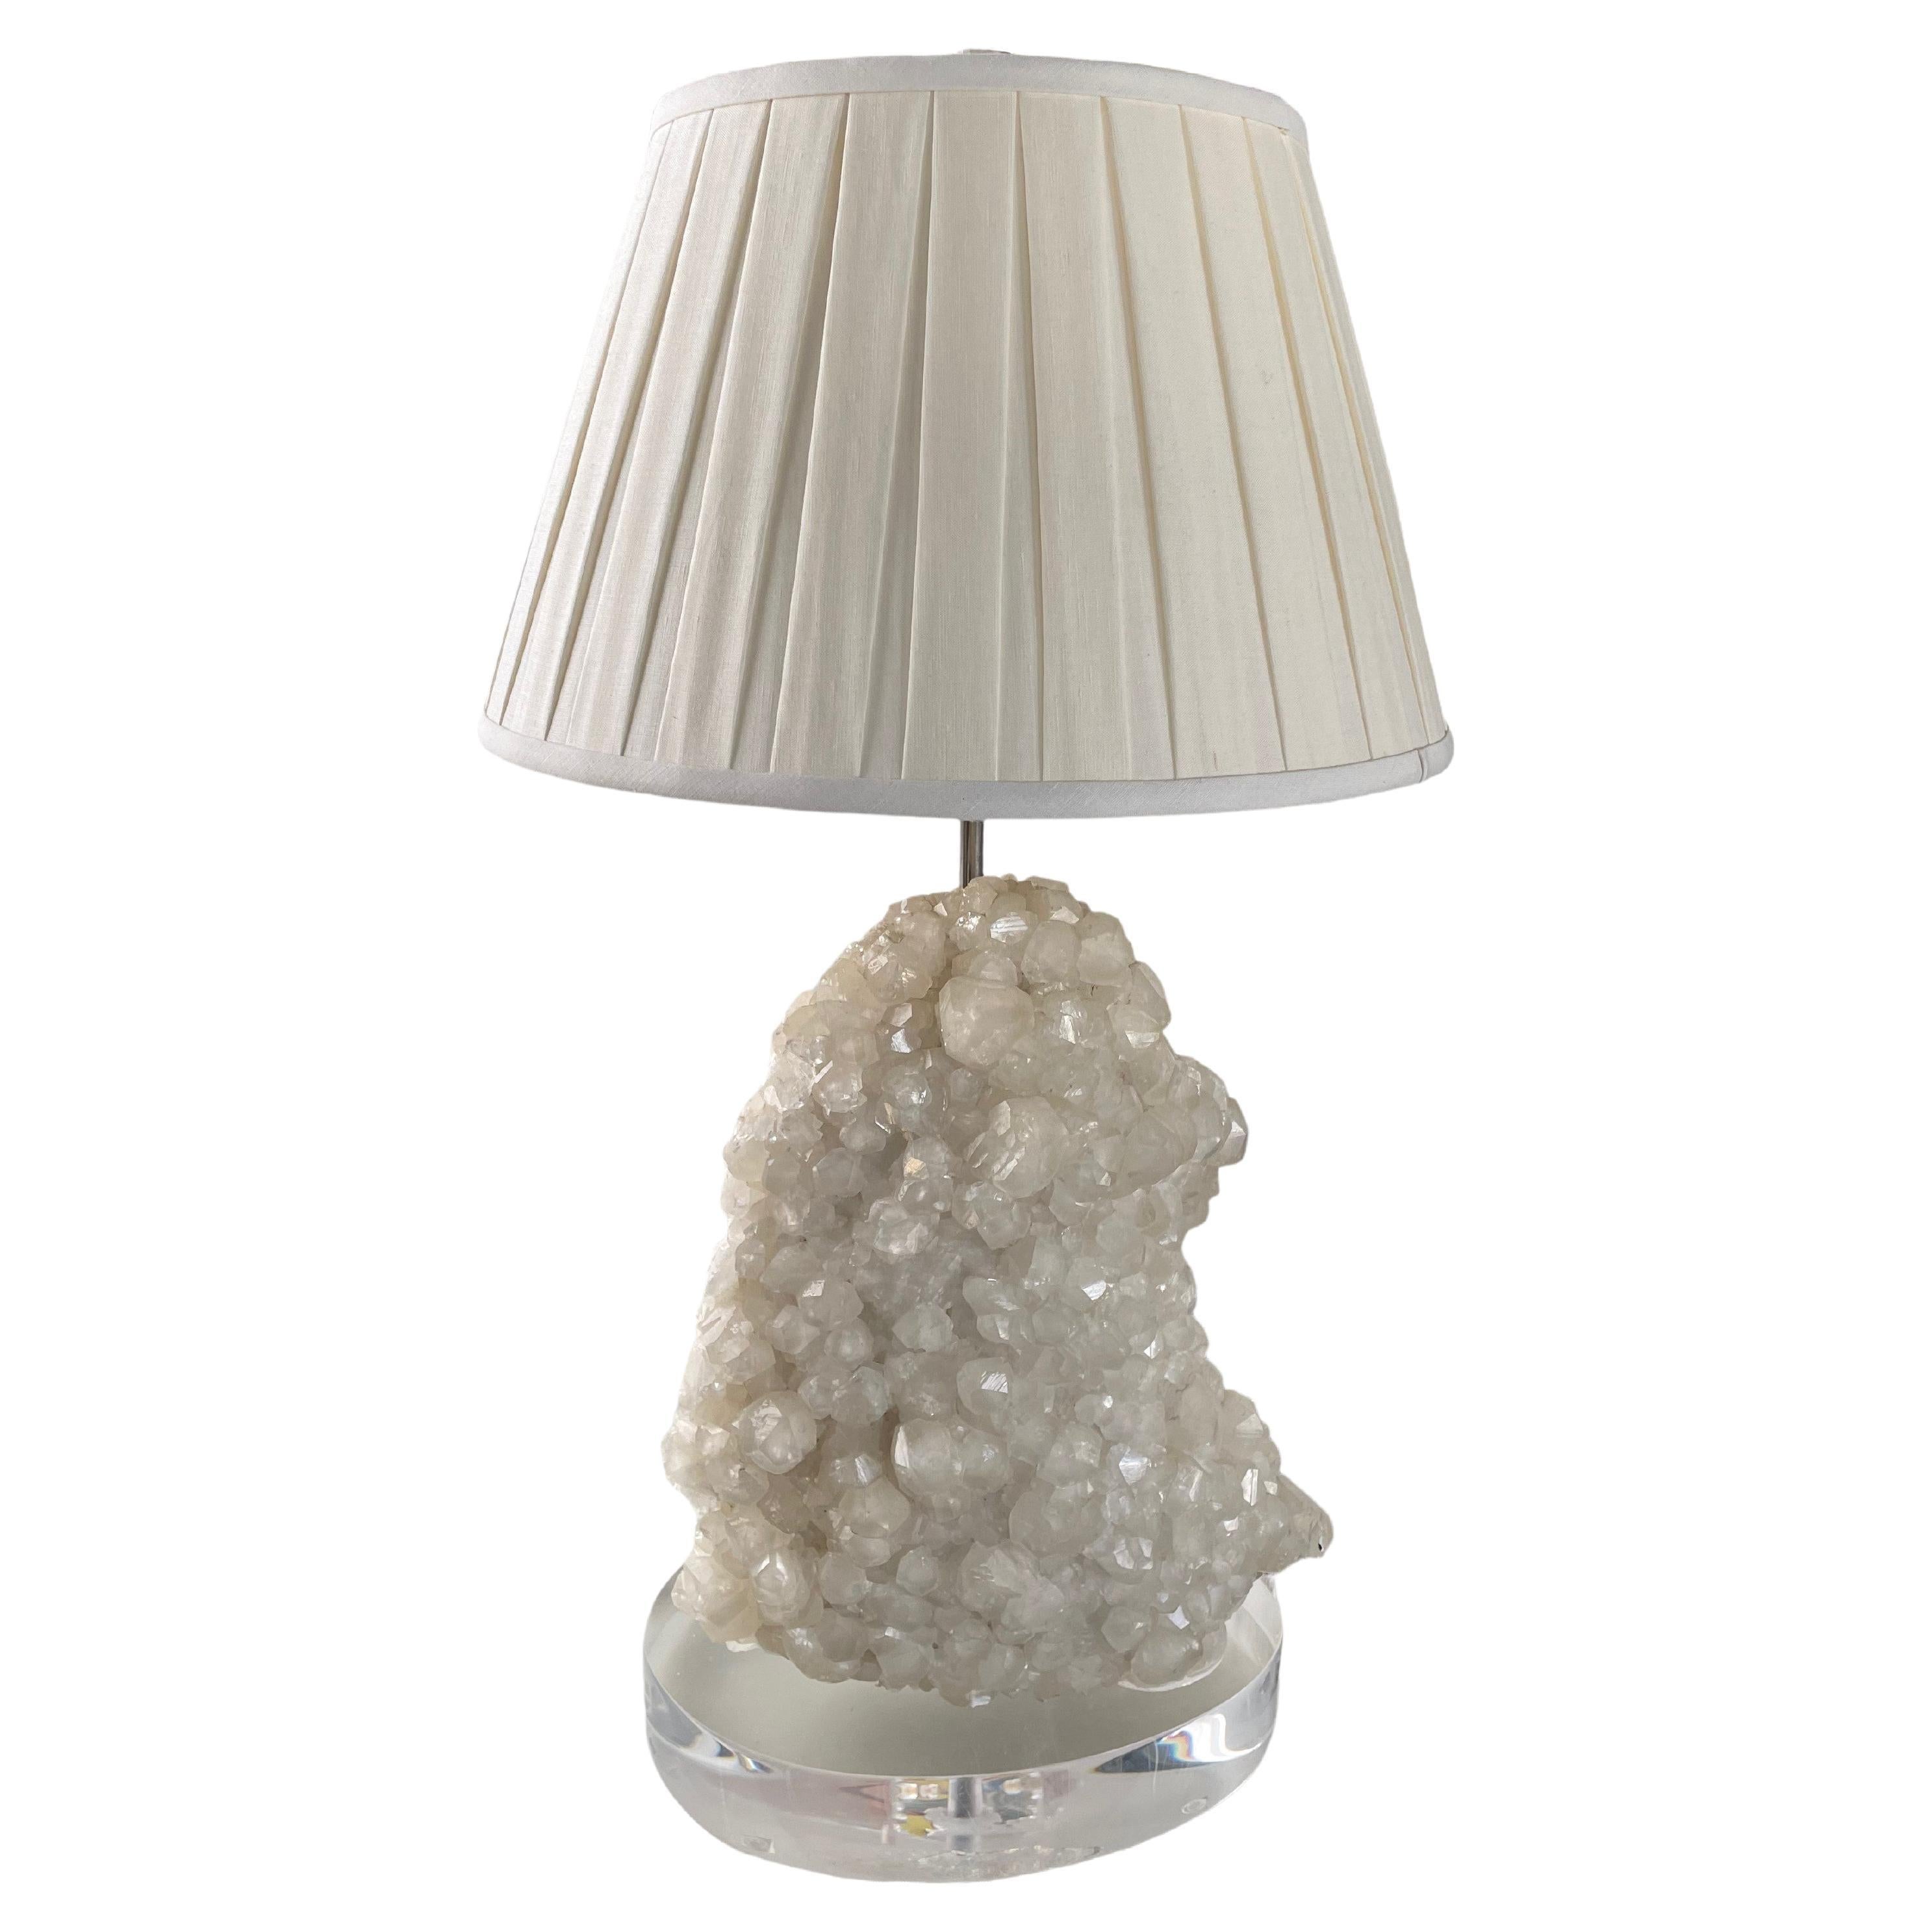 Vintage Quartz Crystal and Lucite Lamp and Shade with Lucite Finial For Sale